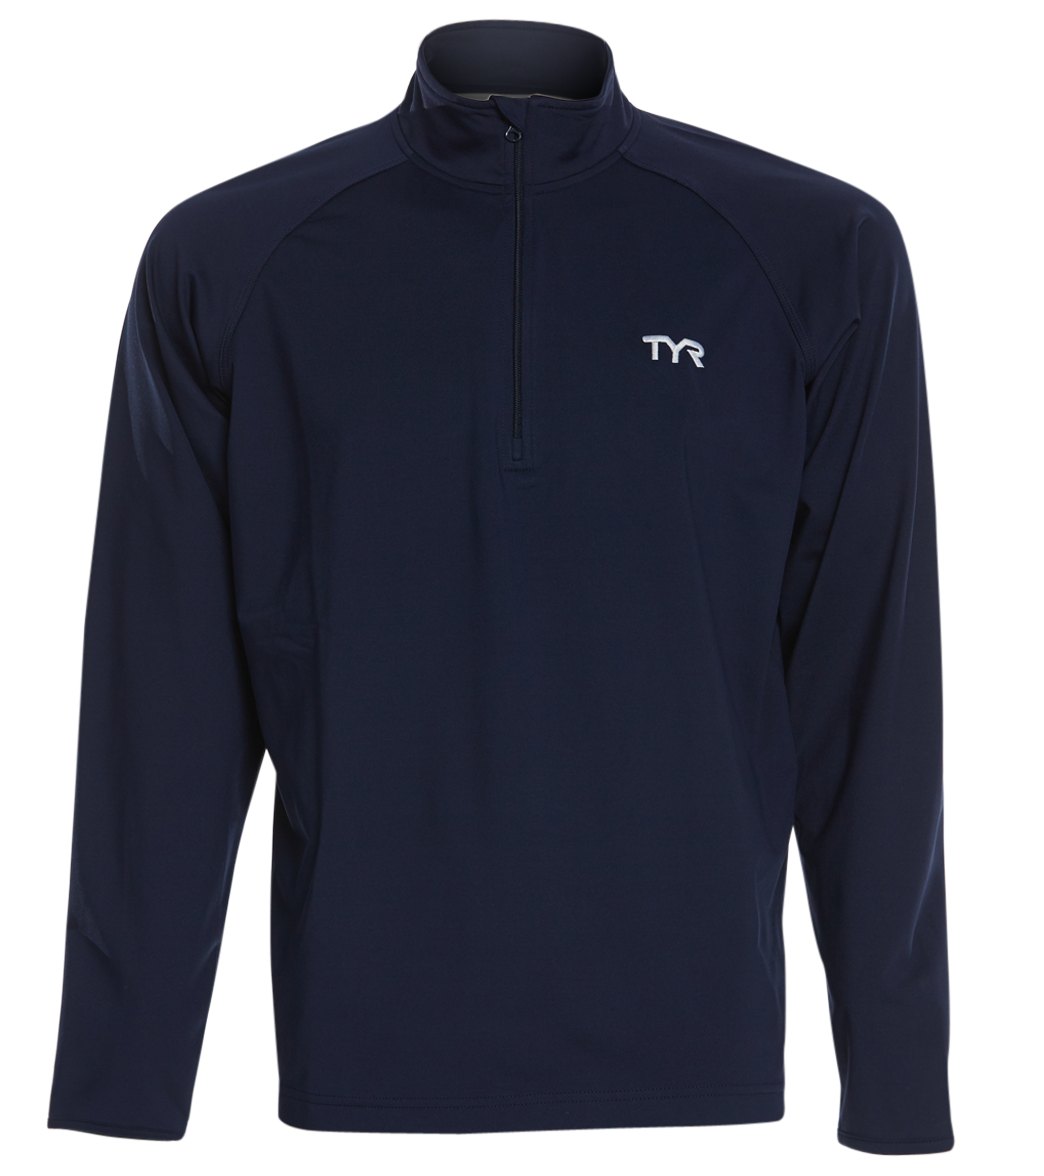 TYR Men's Alliance 1/4 Zip Pullover Jacket - Navy Small Polyester/Spandex - Swimoutlet.com